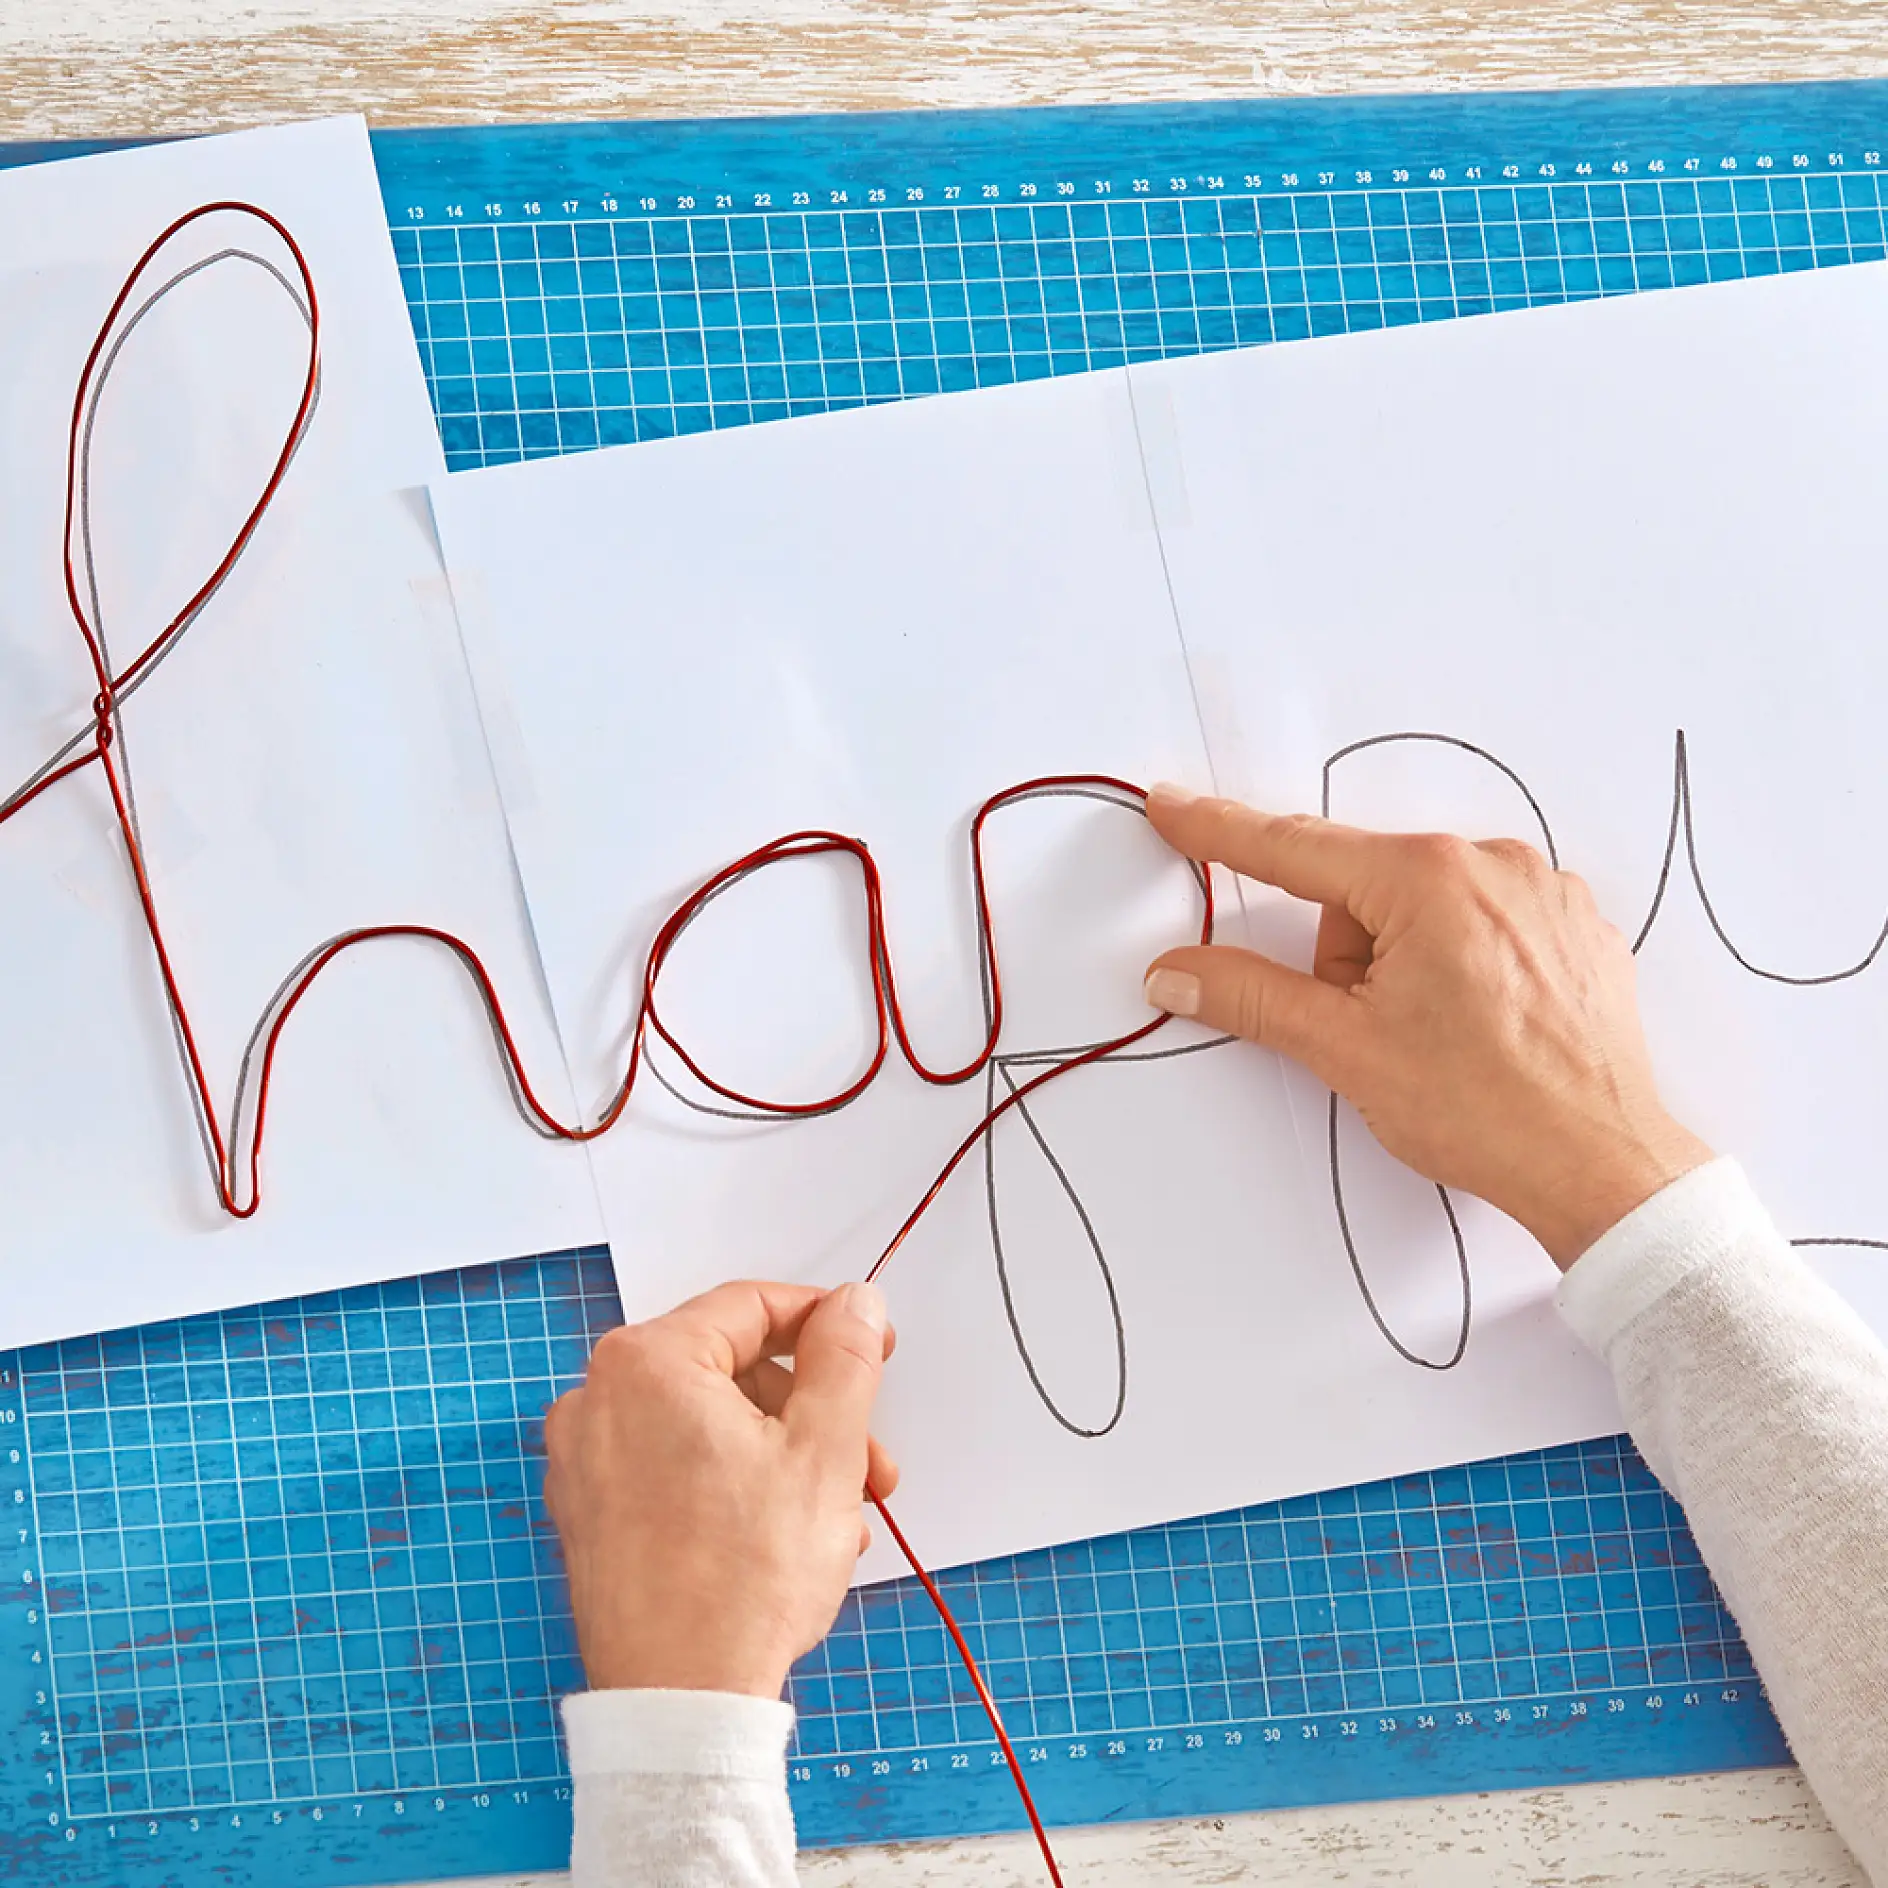 Using the template and wire to create a wire writing sign.